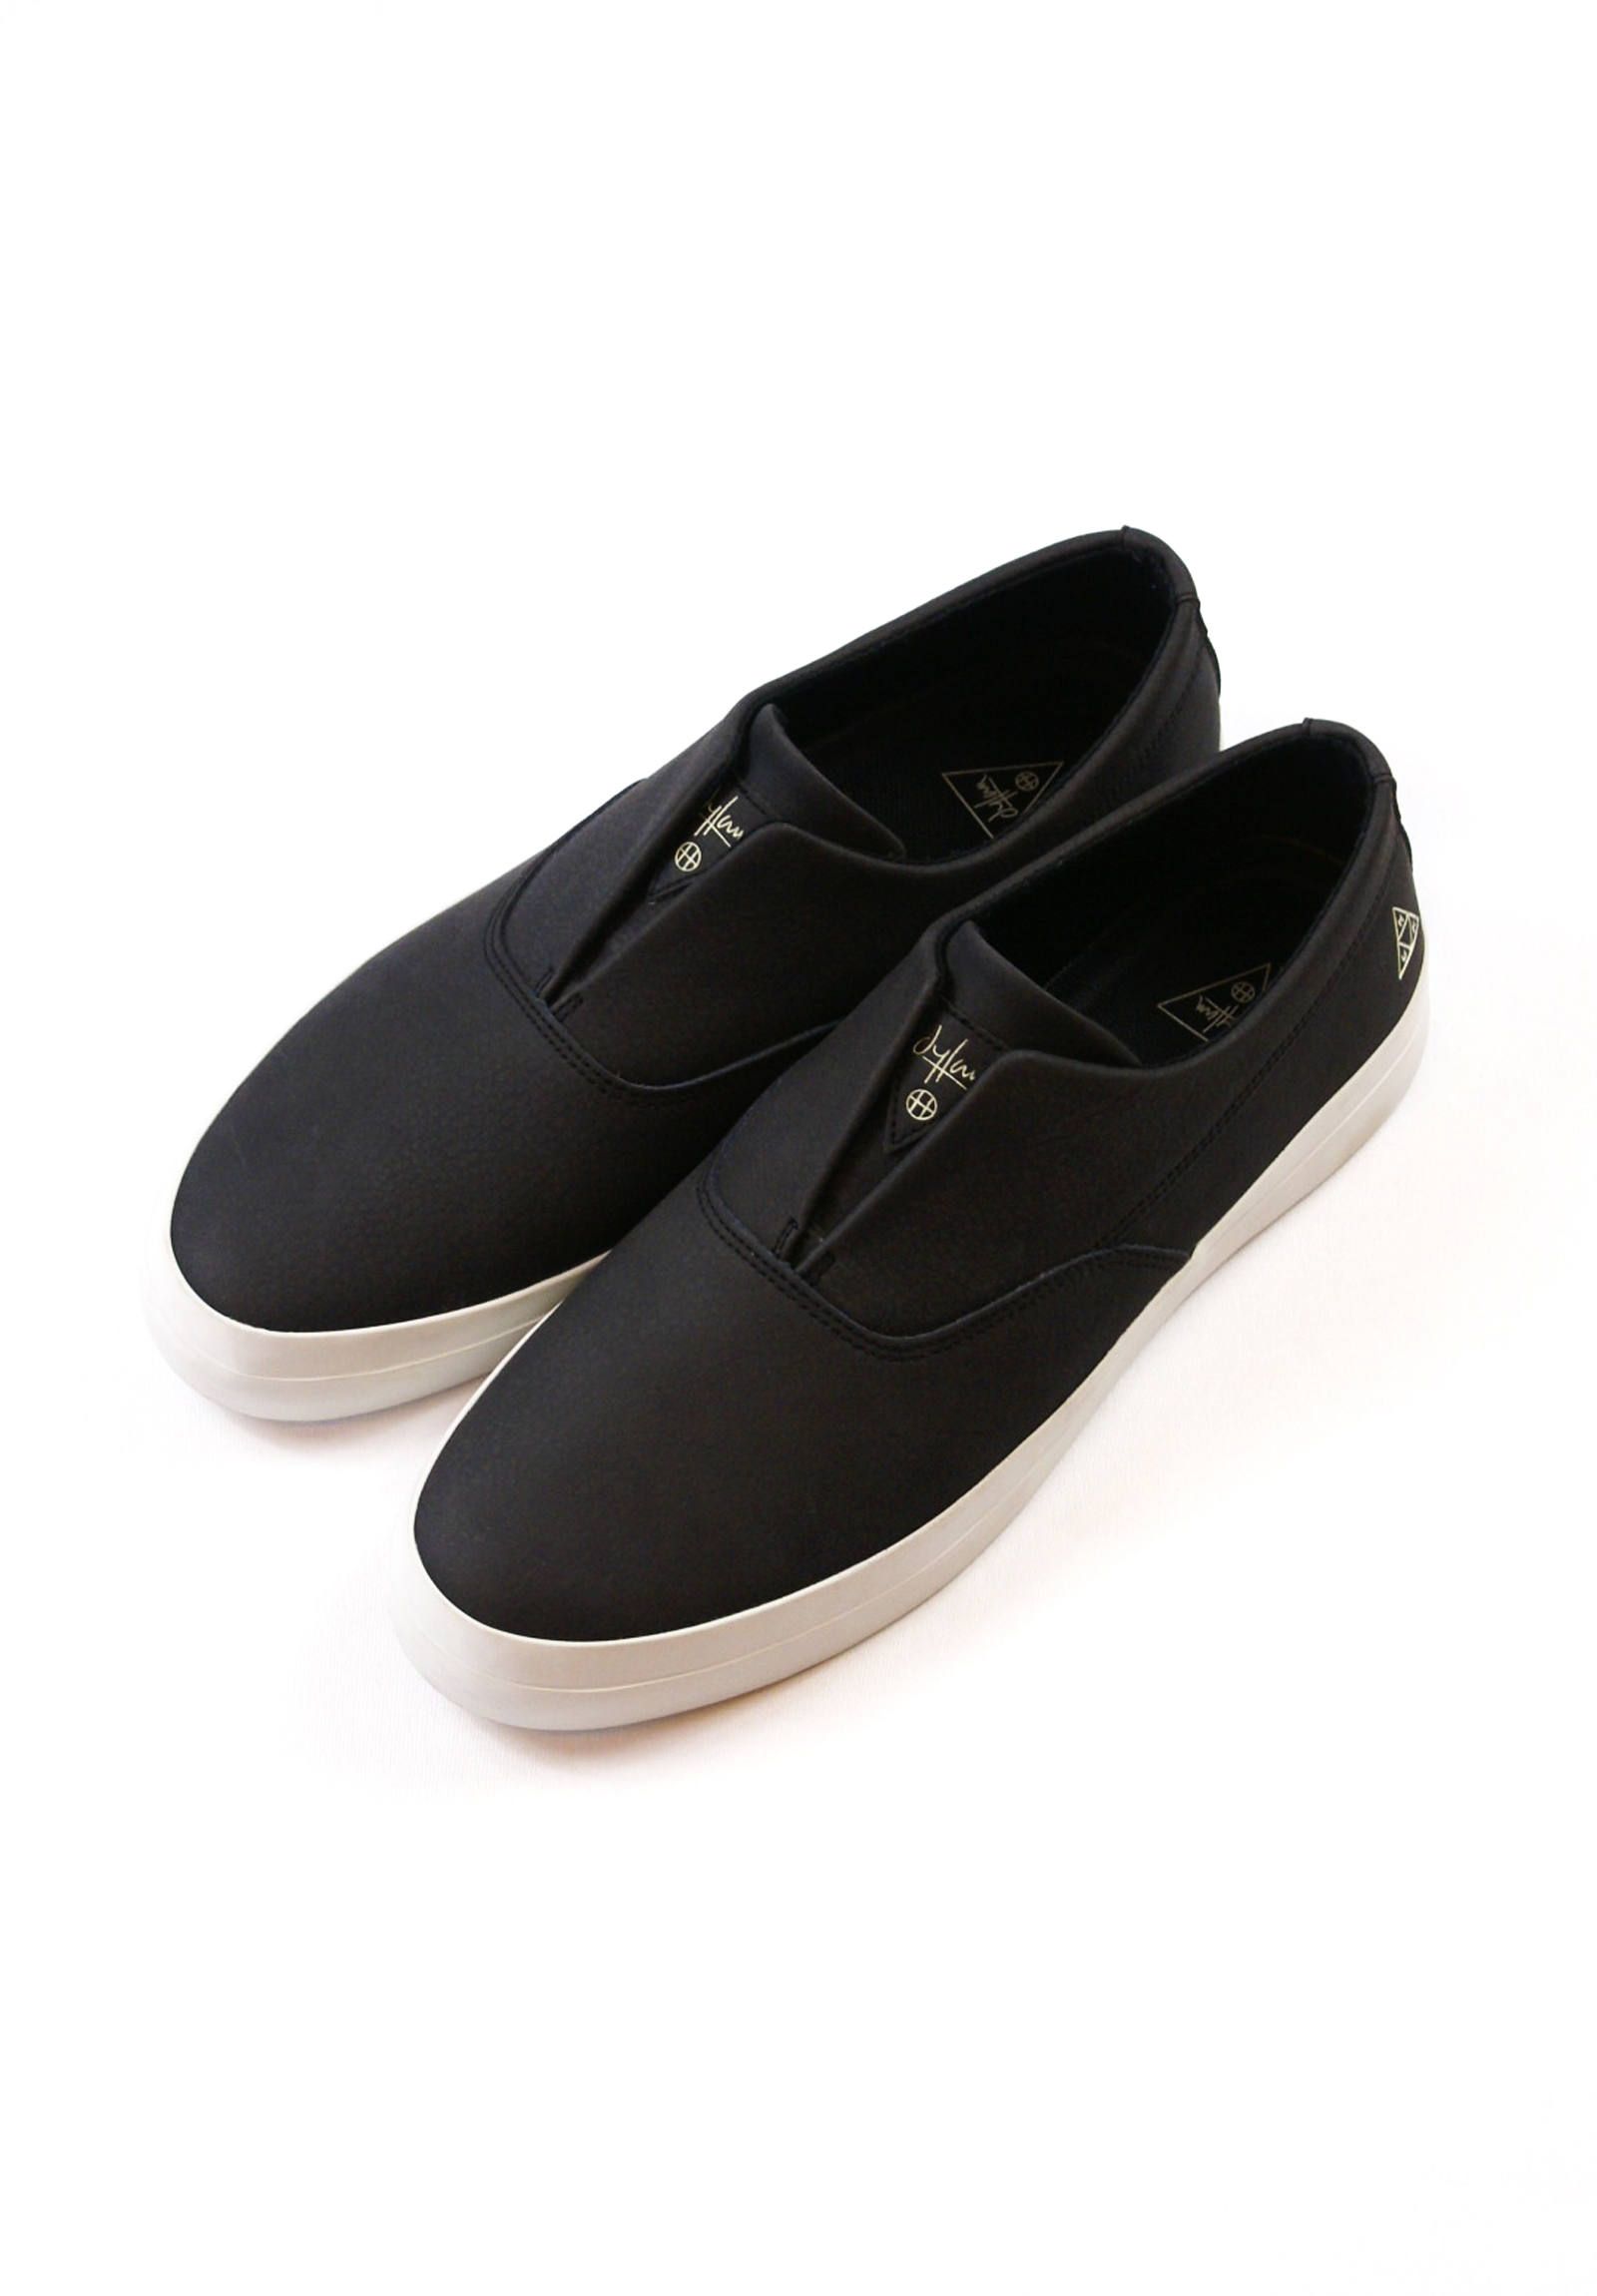 HUF - スリッポン Dylan Slip On Shoes -Black Leather Texture 